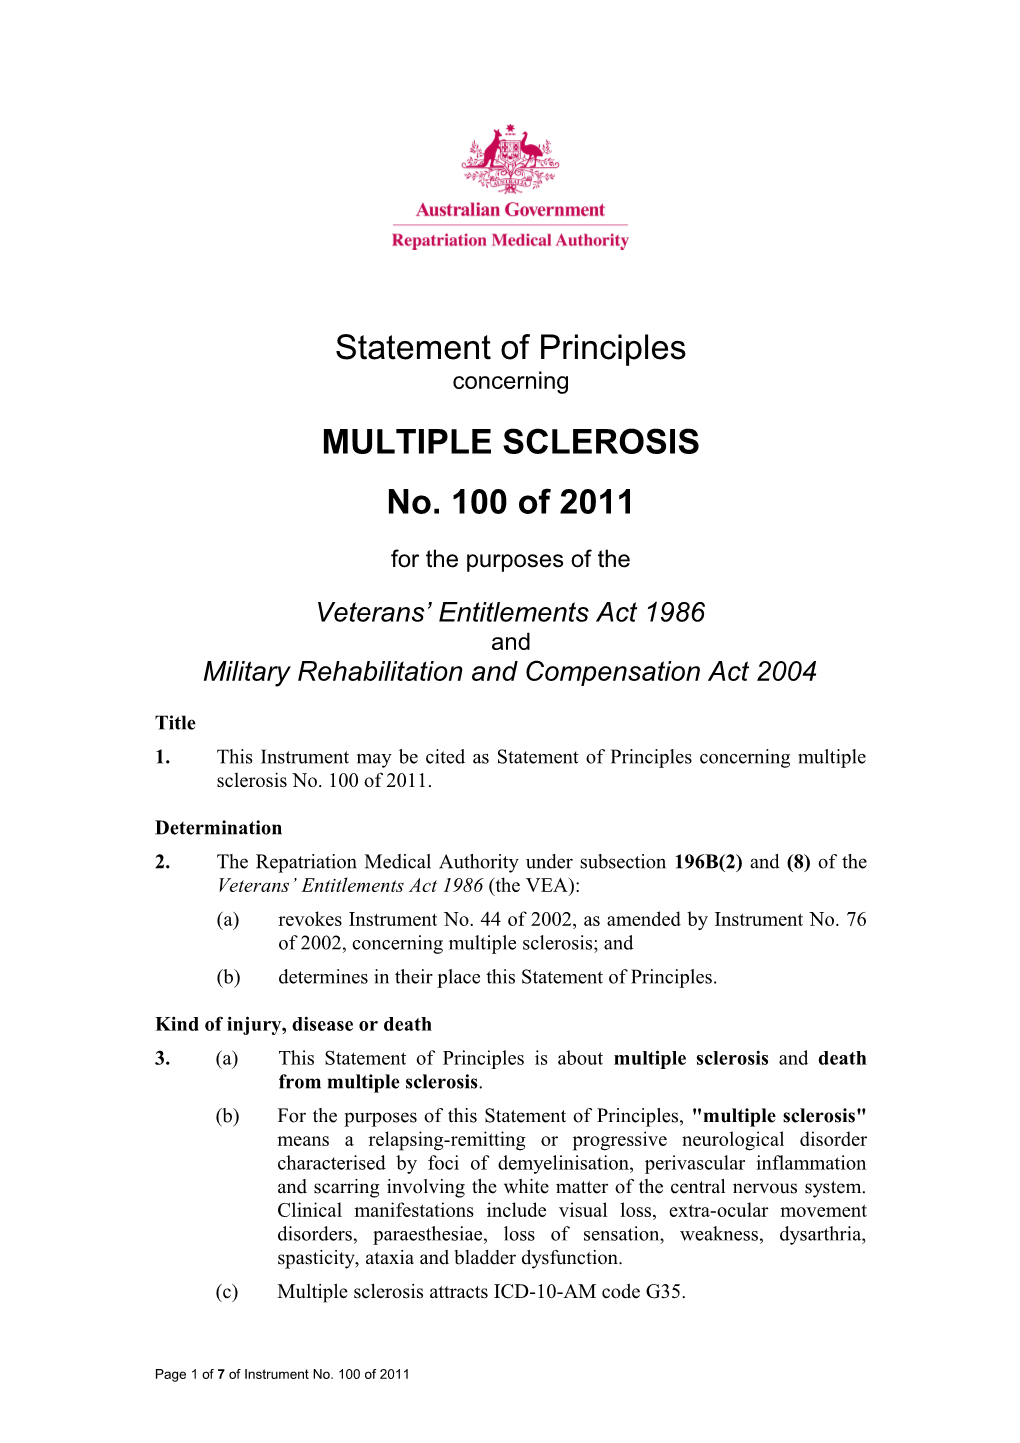 Statement of Principles 100 of 2011 Multiple Sclerosis Reasonable Hypothesis